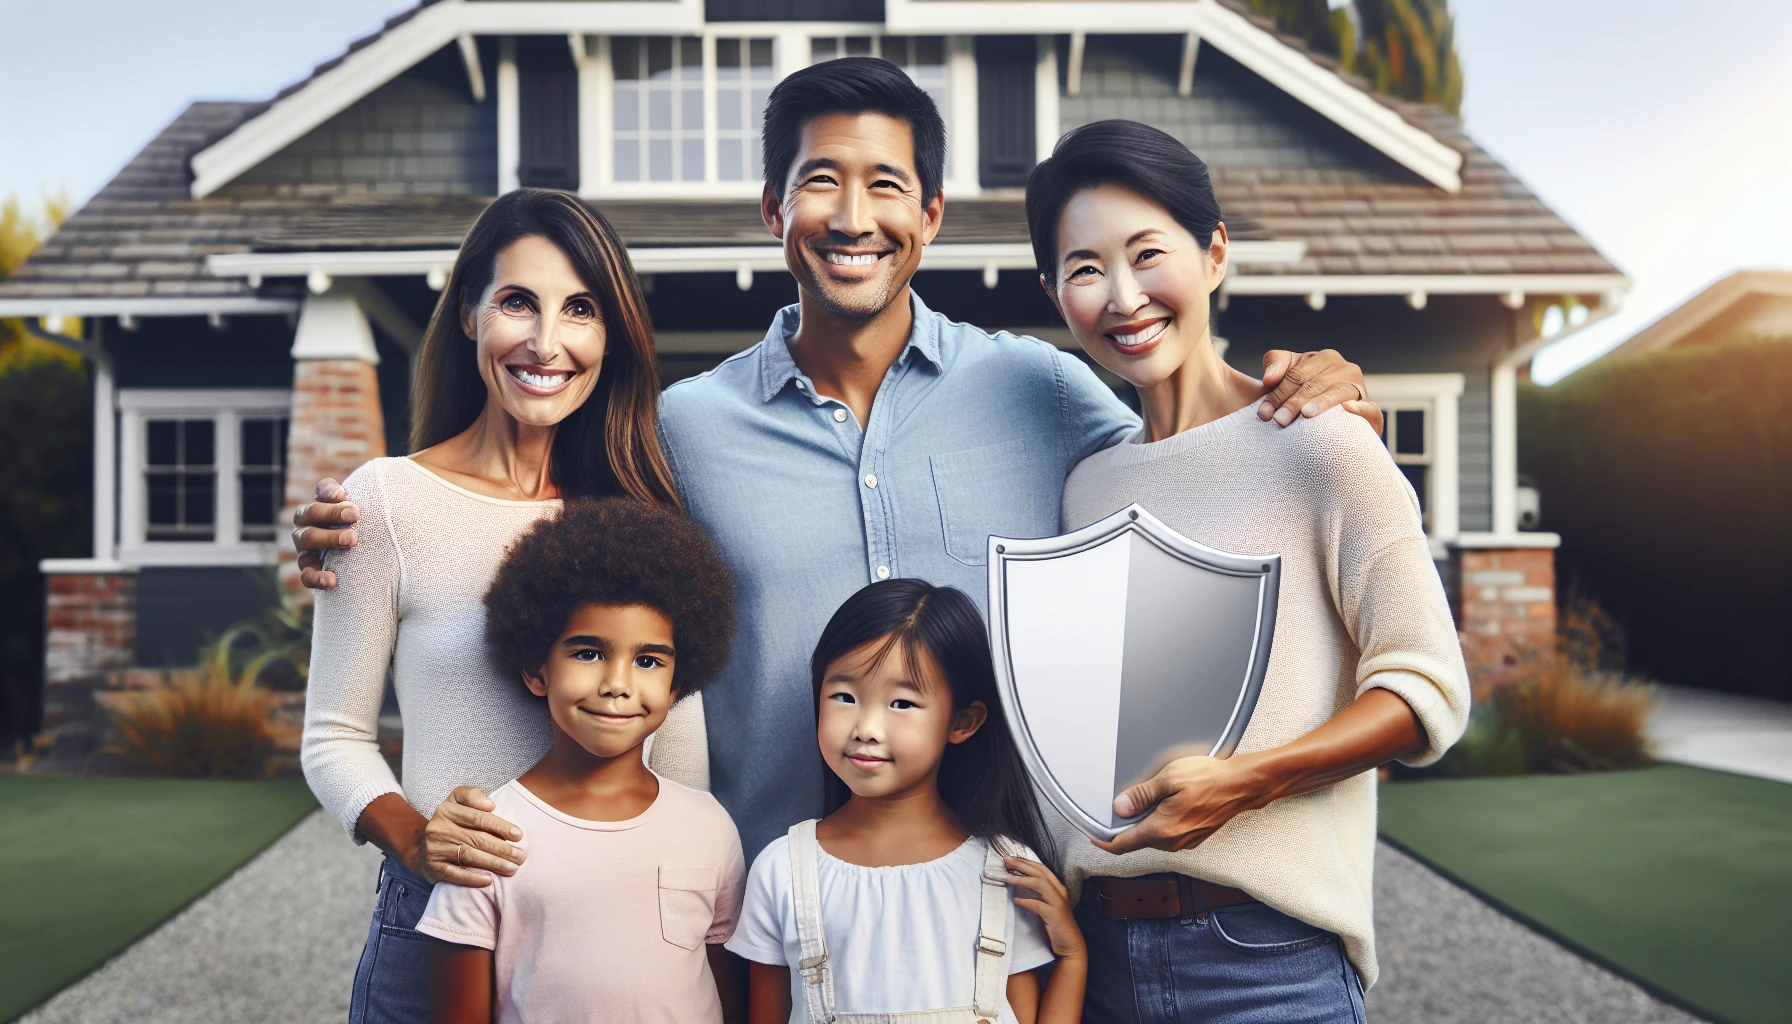 A family feeling secure due to life insurance provided by the employer in Folsom, CA